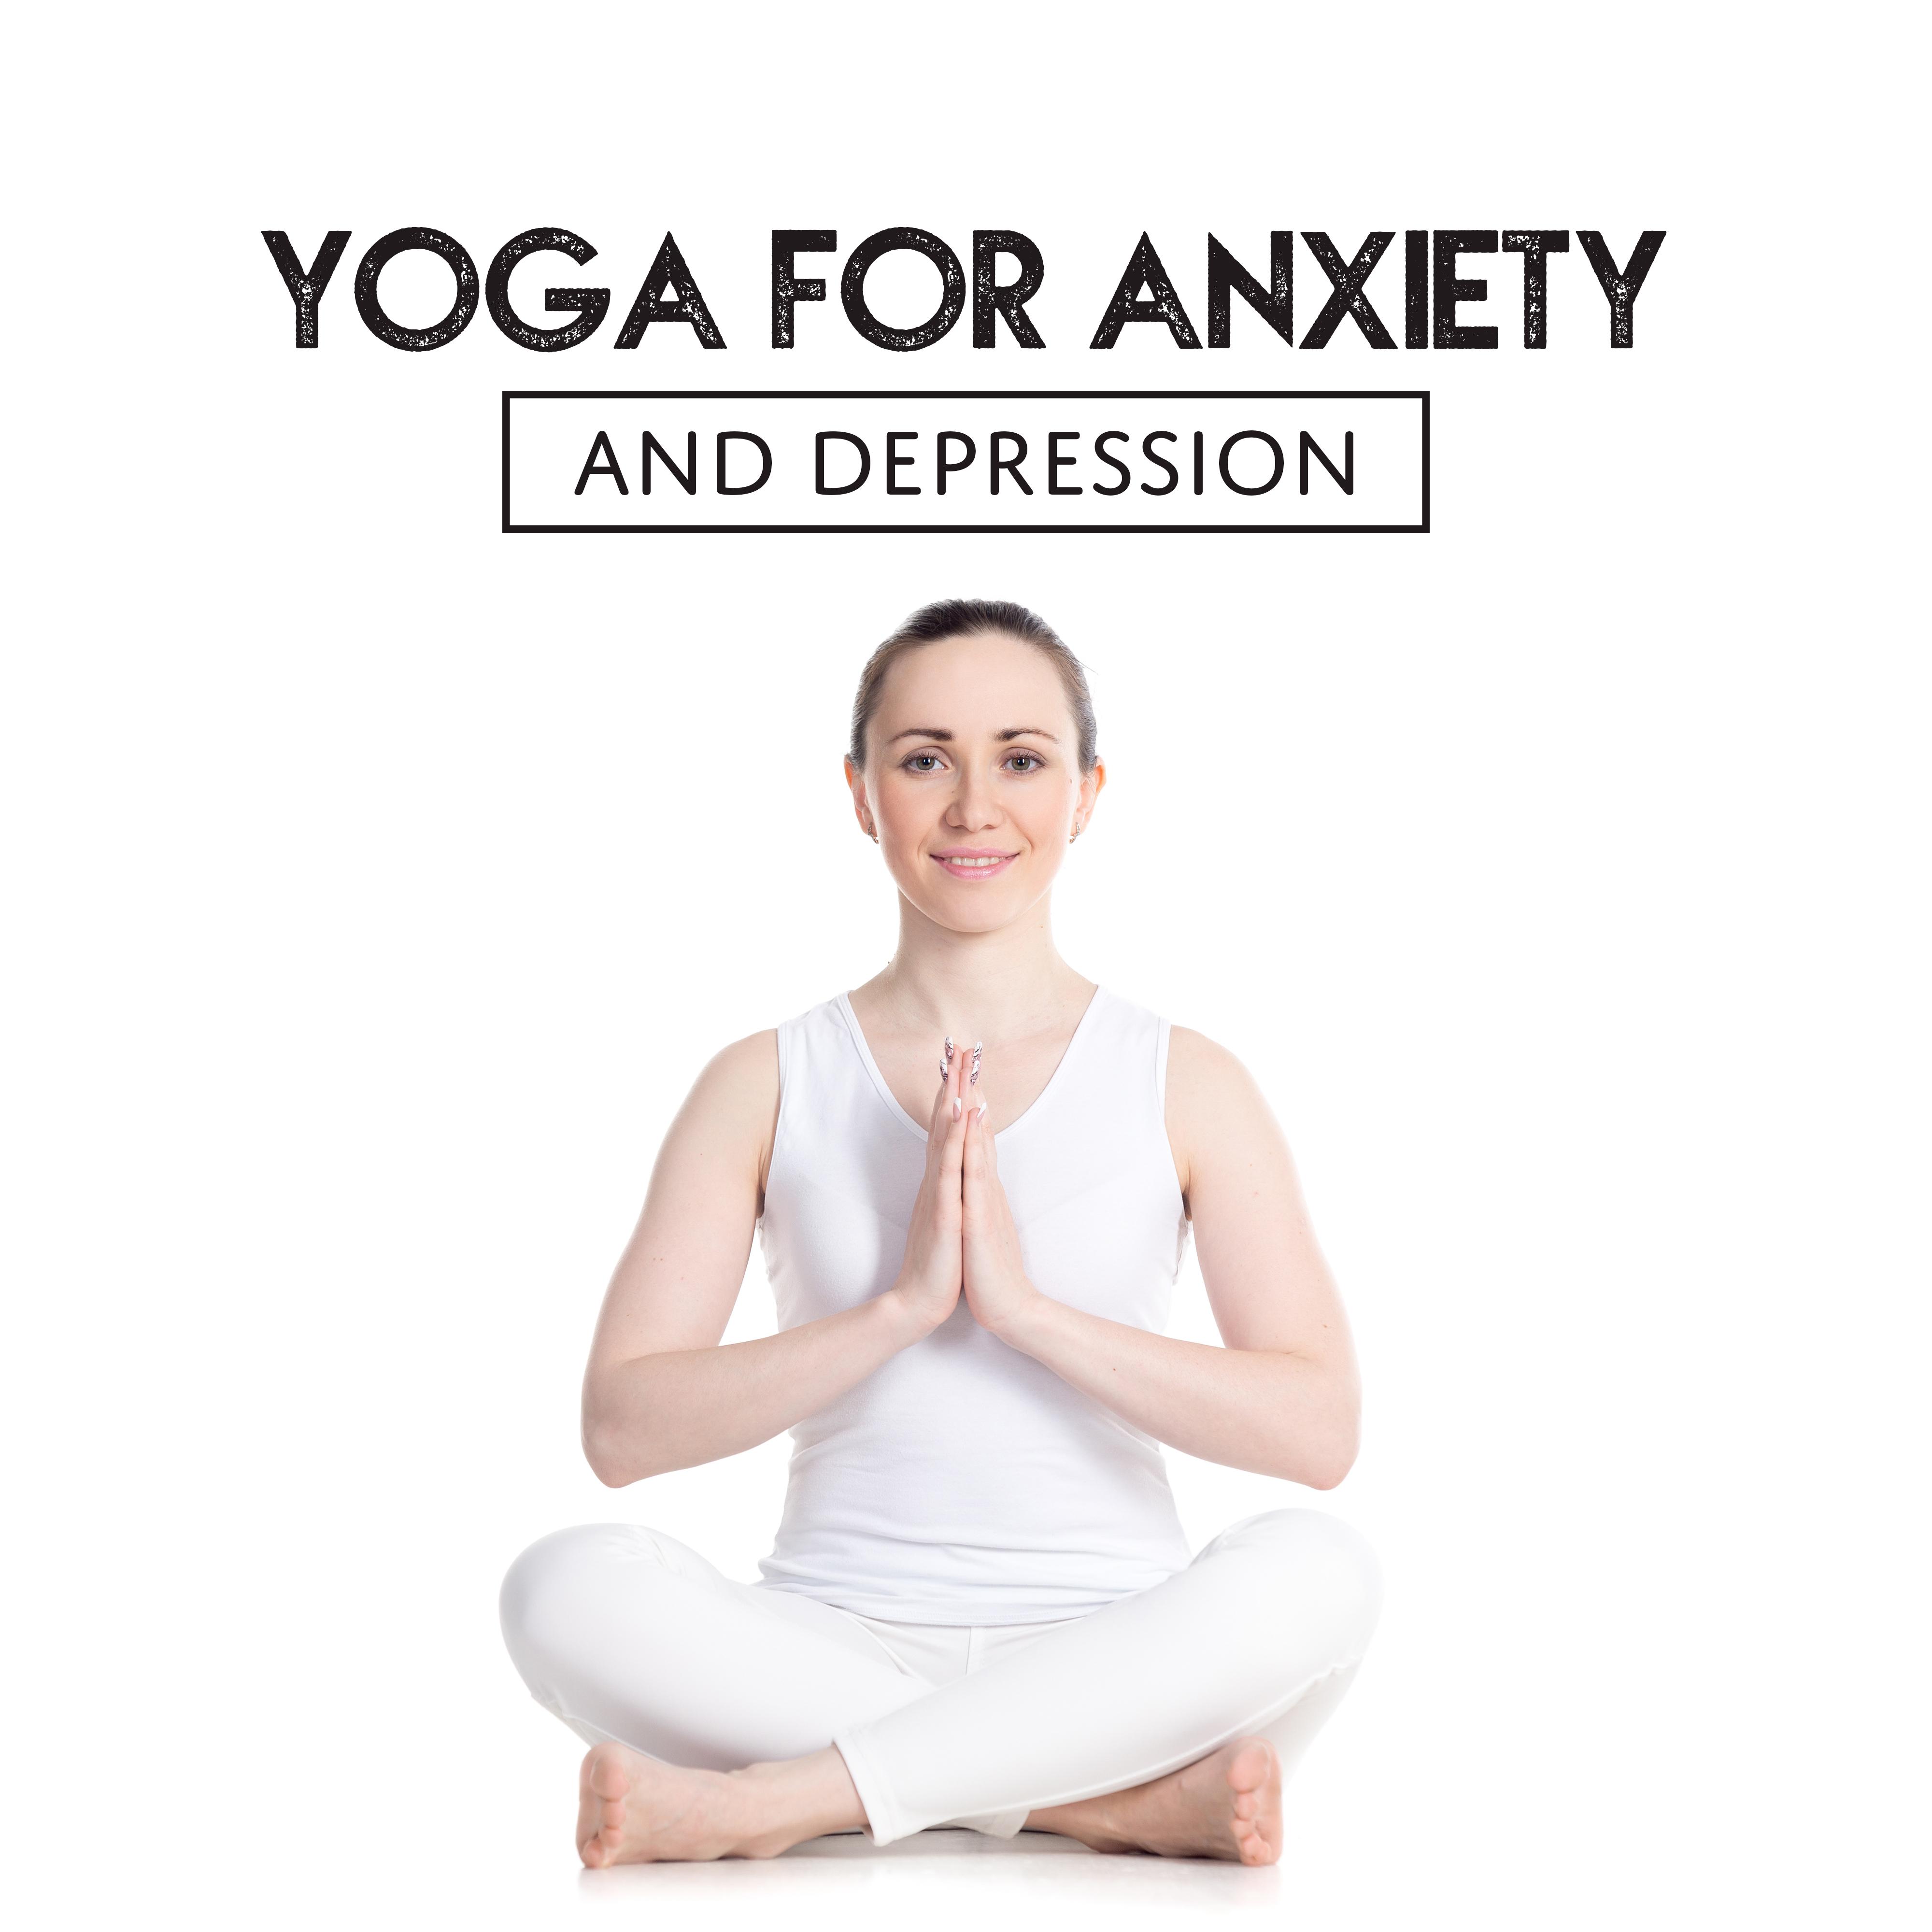 Yoga for Anxiety and Depression